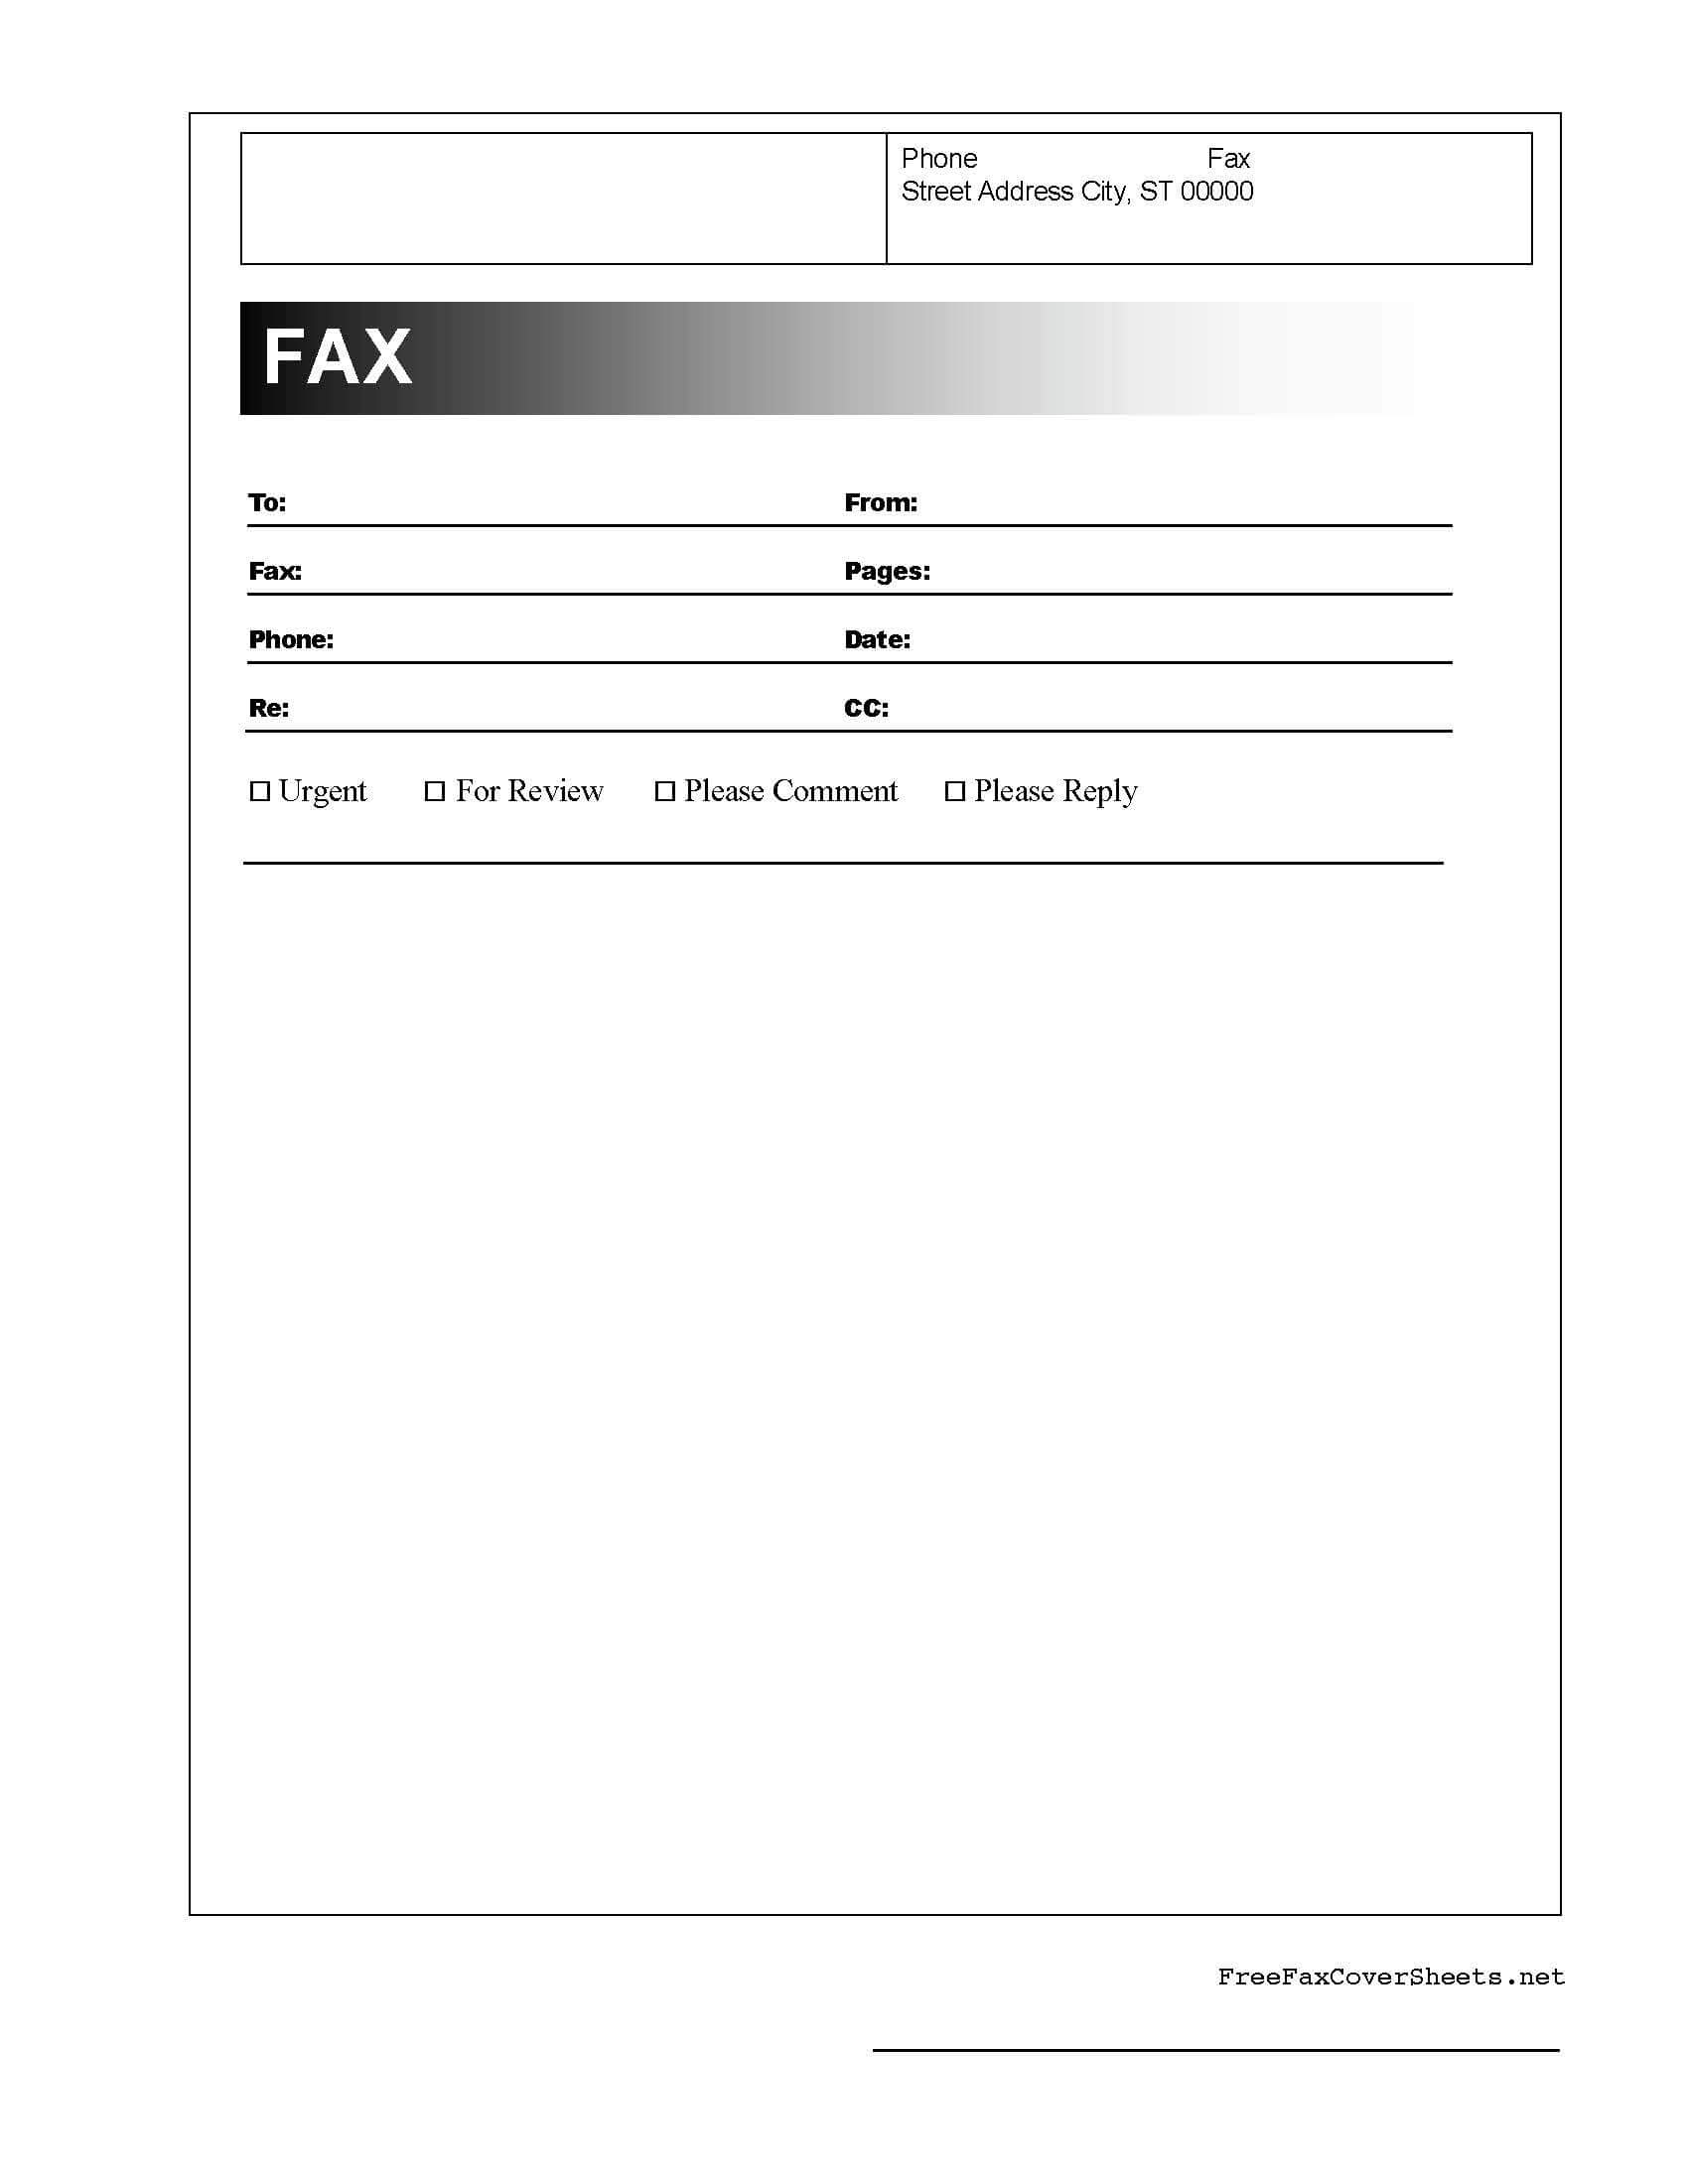 028 Basic Fax Cover Sheet Template Templates Word Amazing For Fax Cover Sheet Template Word 2010